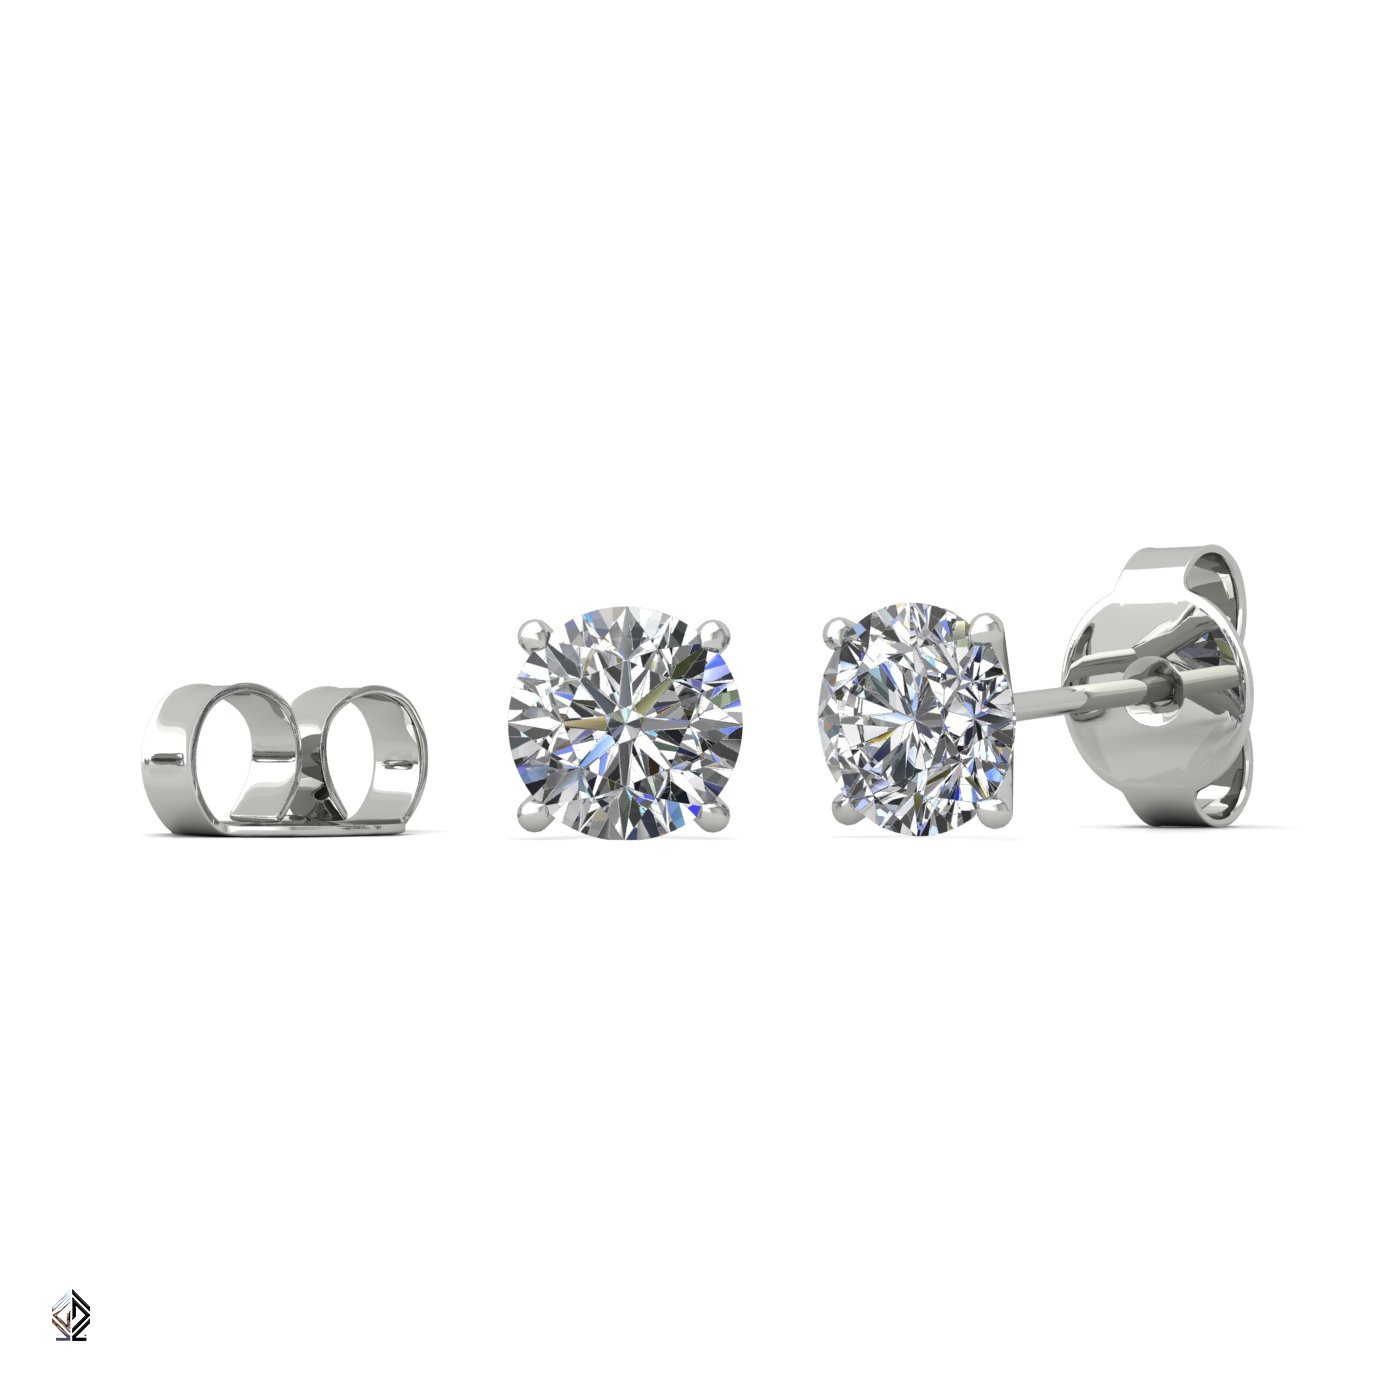 18k white gold 0,5 ct 4 prongs round cut classic diamond earring studs Photos & images